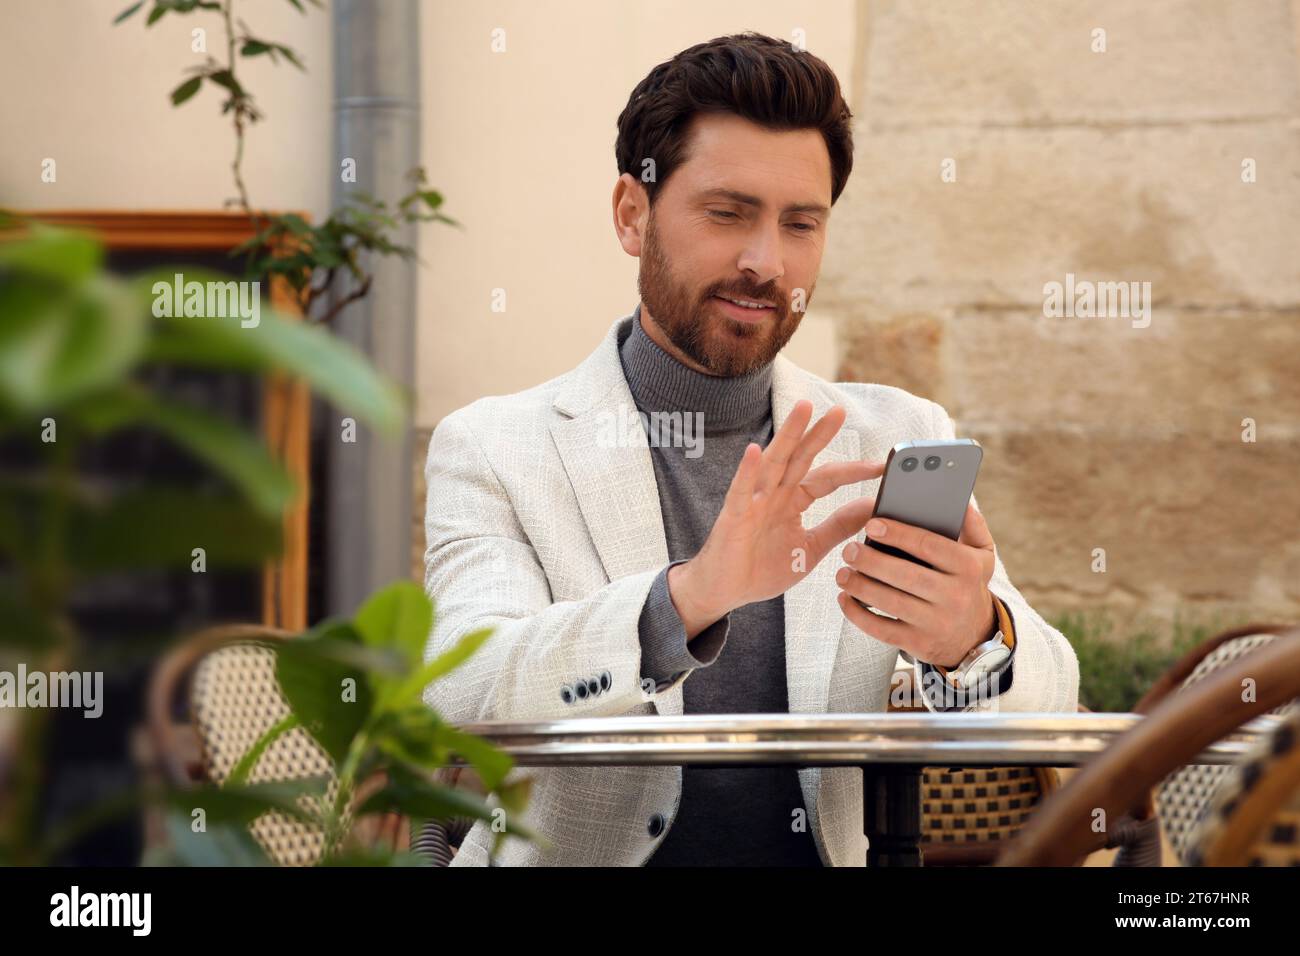 Handsome man sending message via smartphone at table outdoors Stock Photo